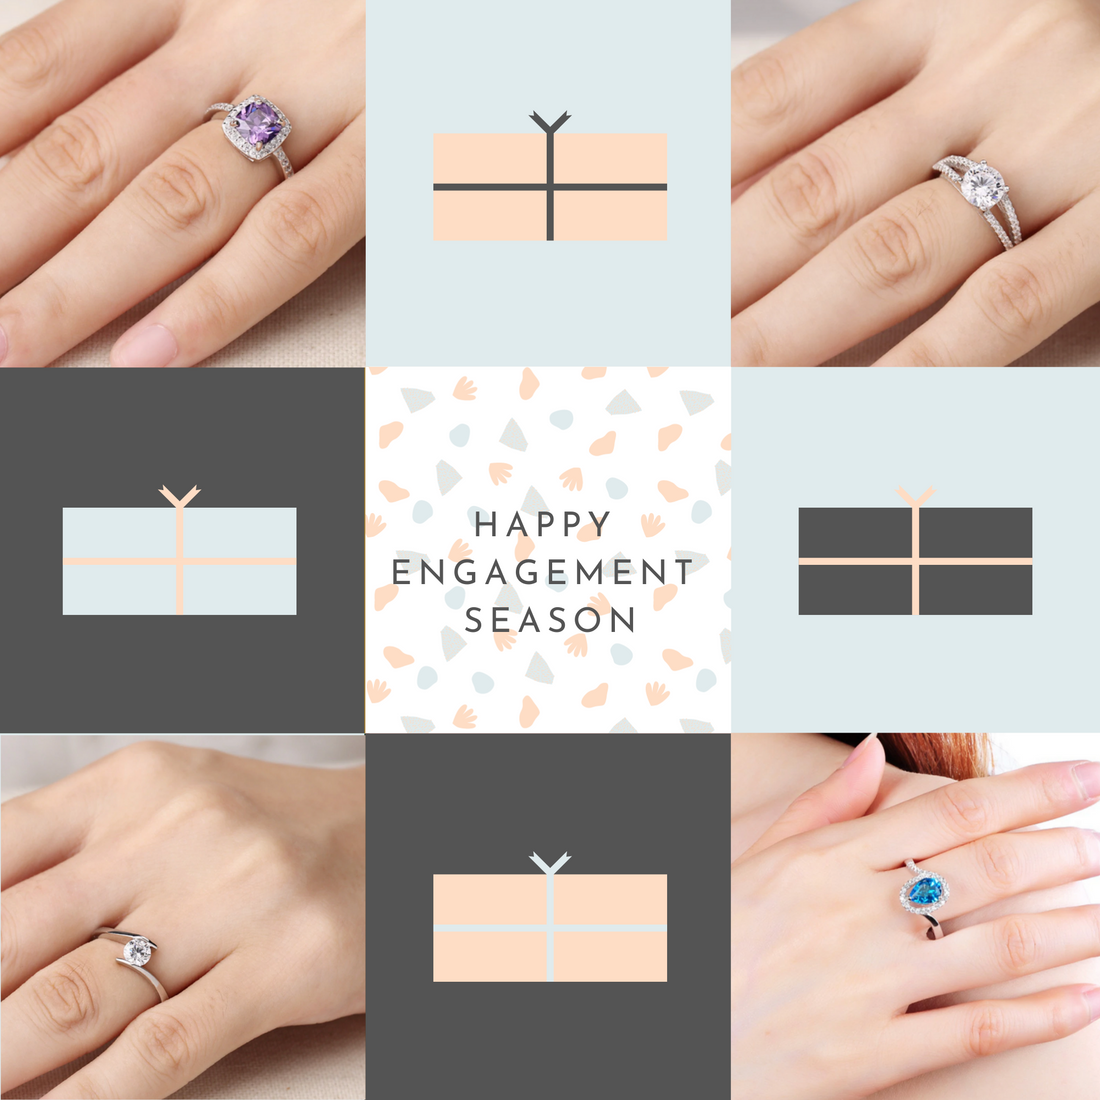 Looking for the perfect engagement ring?